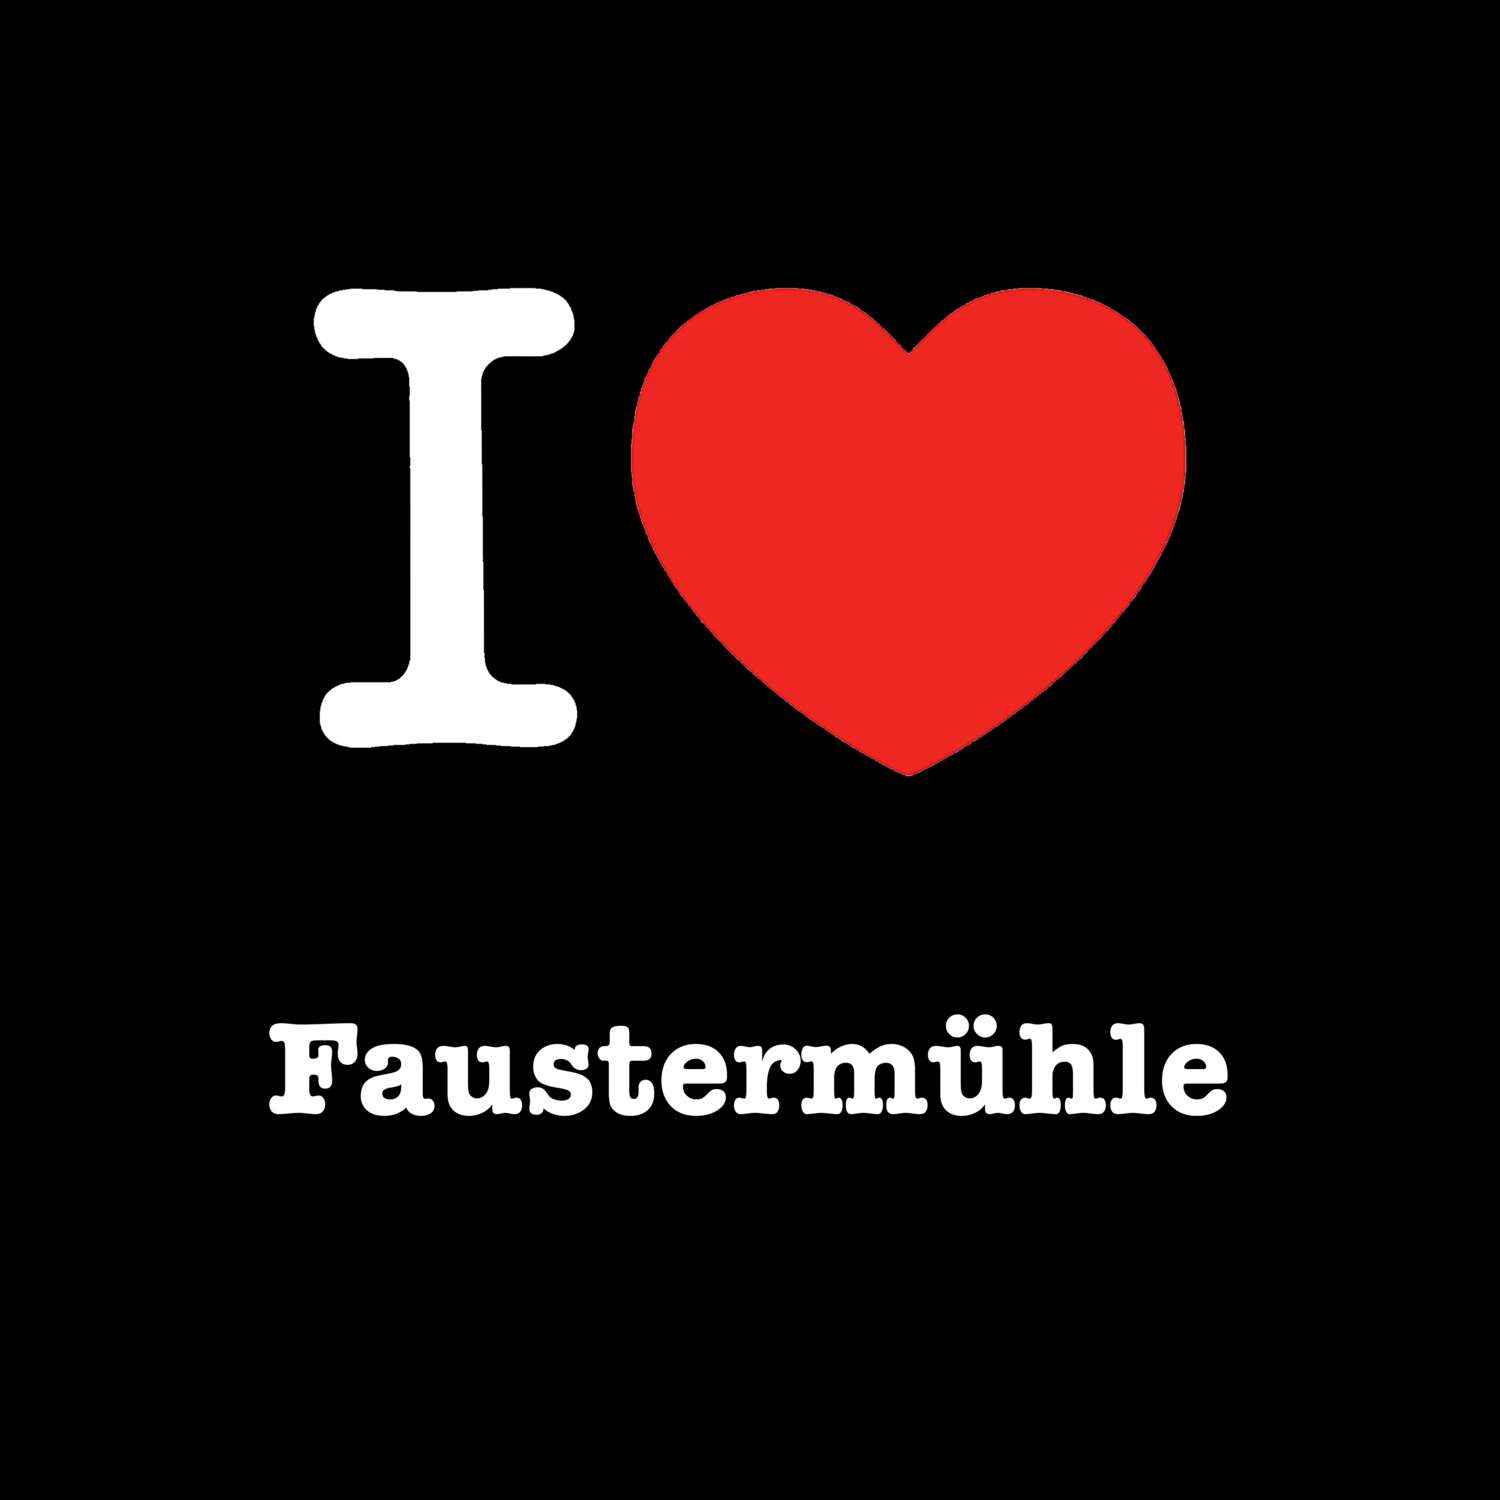 Faustermühle T-Shirt »I love«